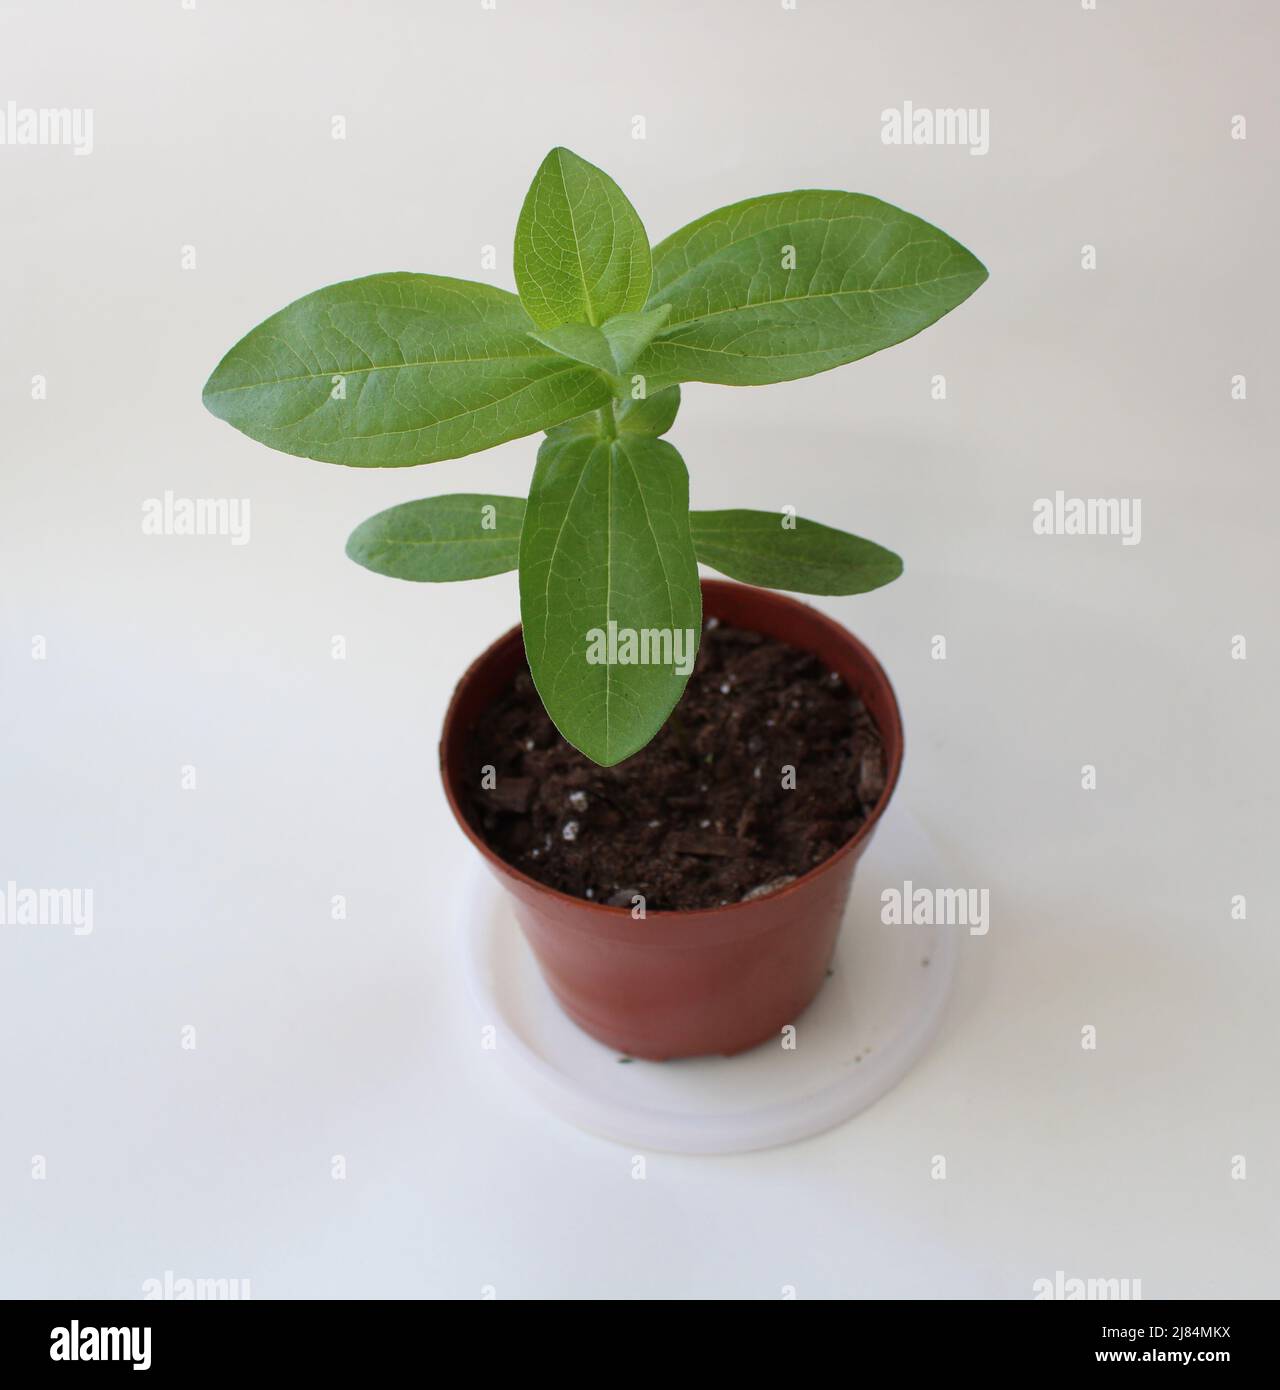 A Young Zinnia Plant in a Plastic Pot Stock Photo